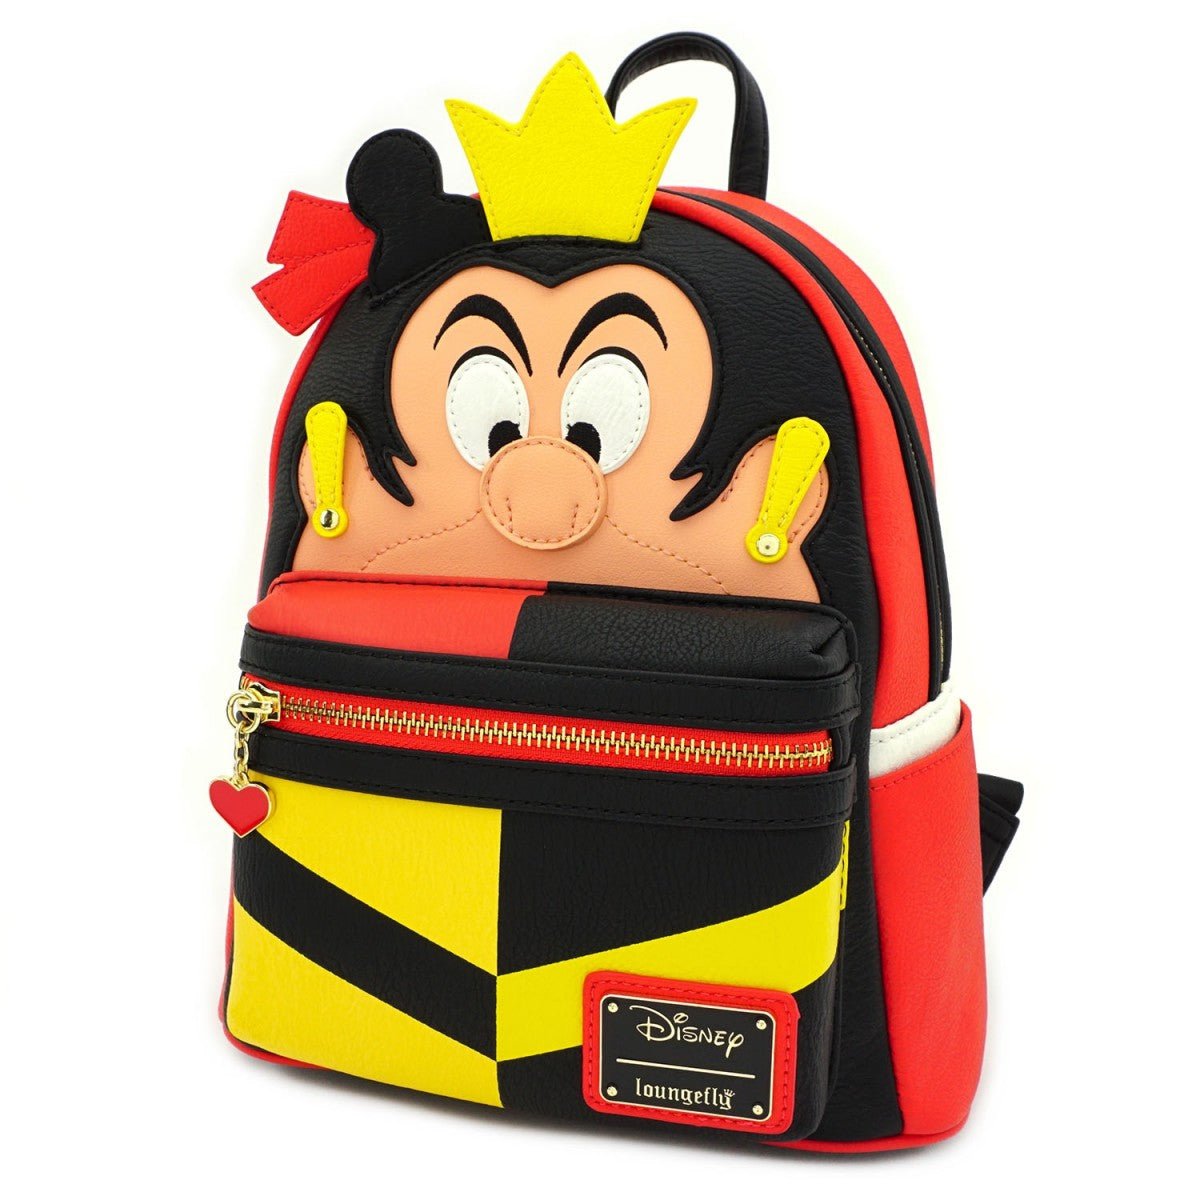 Loungefly x Disney Queen of Hearts Cosplay Mini Backpack - GeekCore